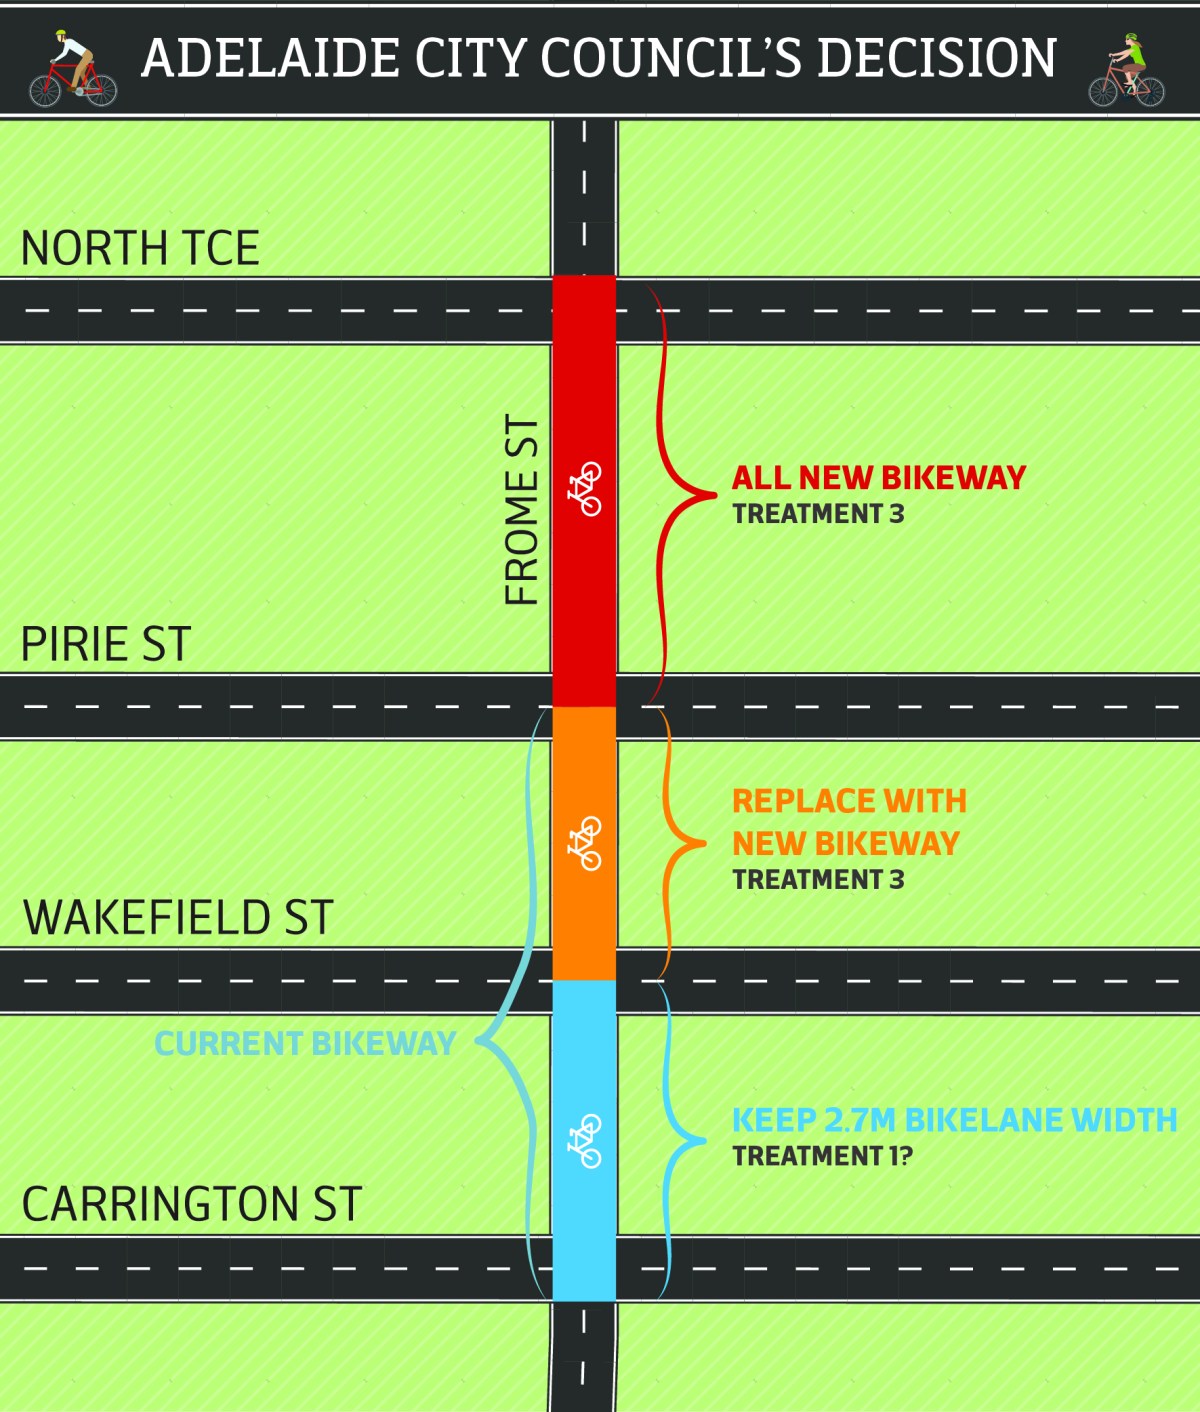 All of the existing bikeway will be renovated, and a thinner bikeway will extend to North Terrace as a result of last night's decision. This conceptual map shows the key dividing streets. Image: Leah Zahorujko/InDaily